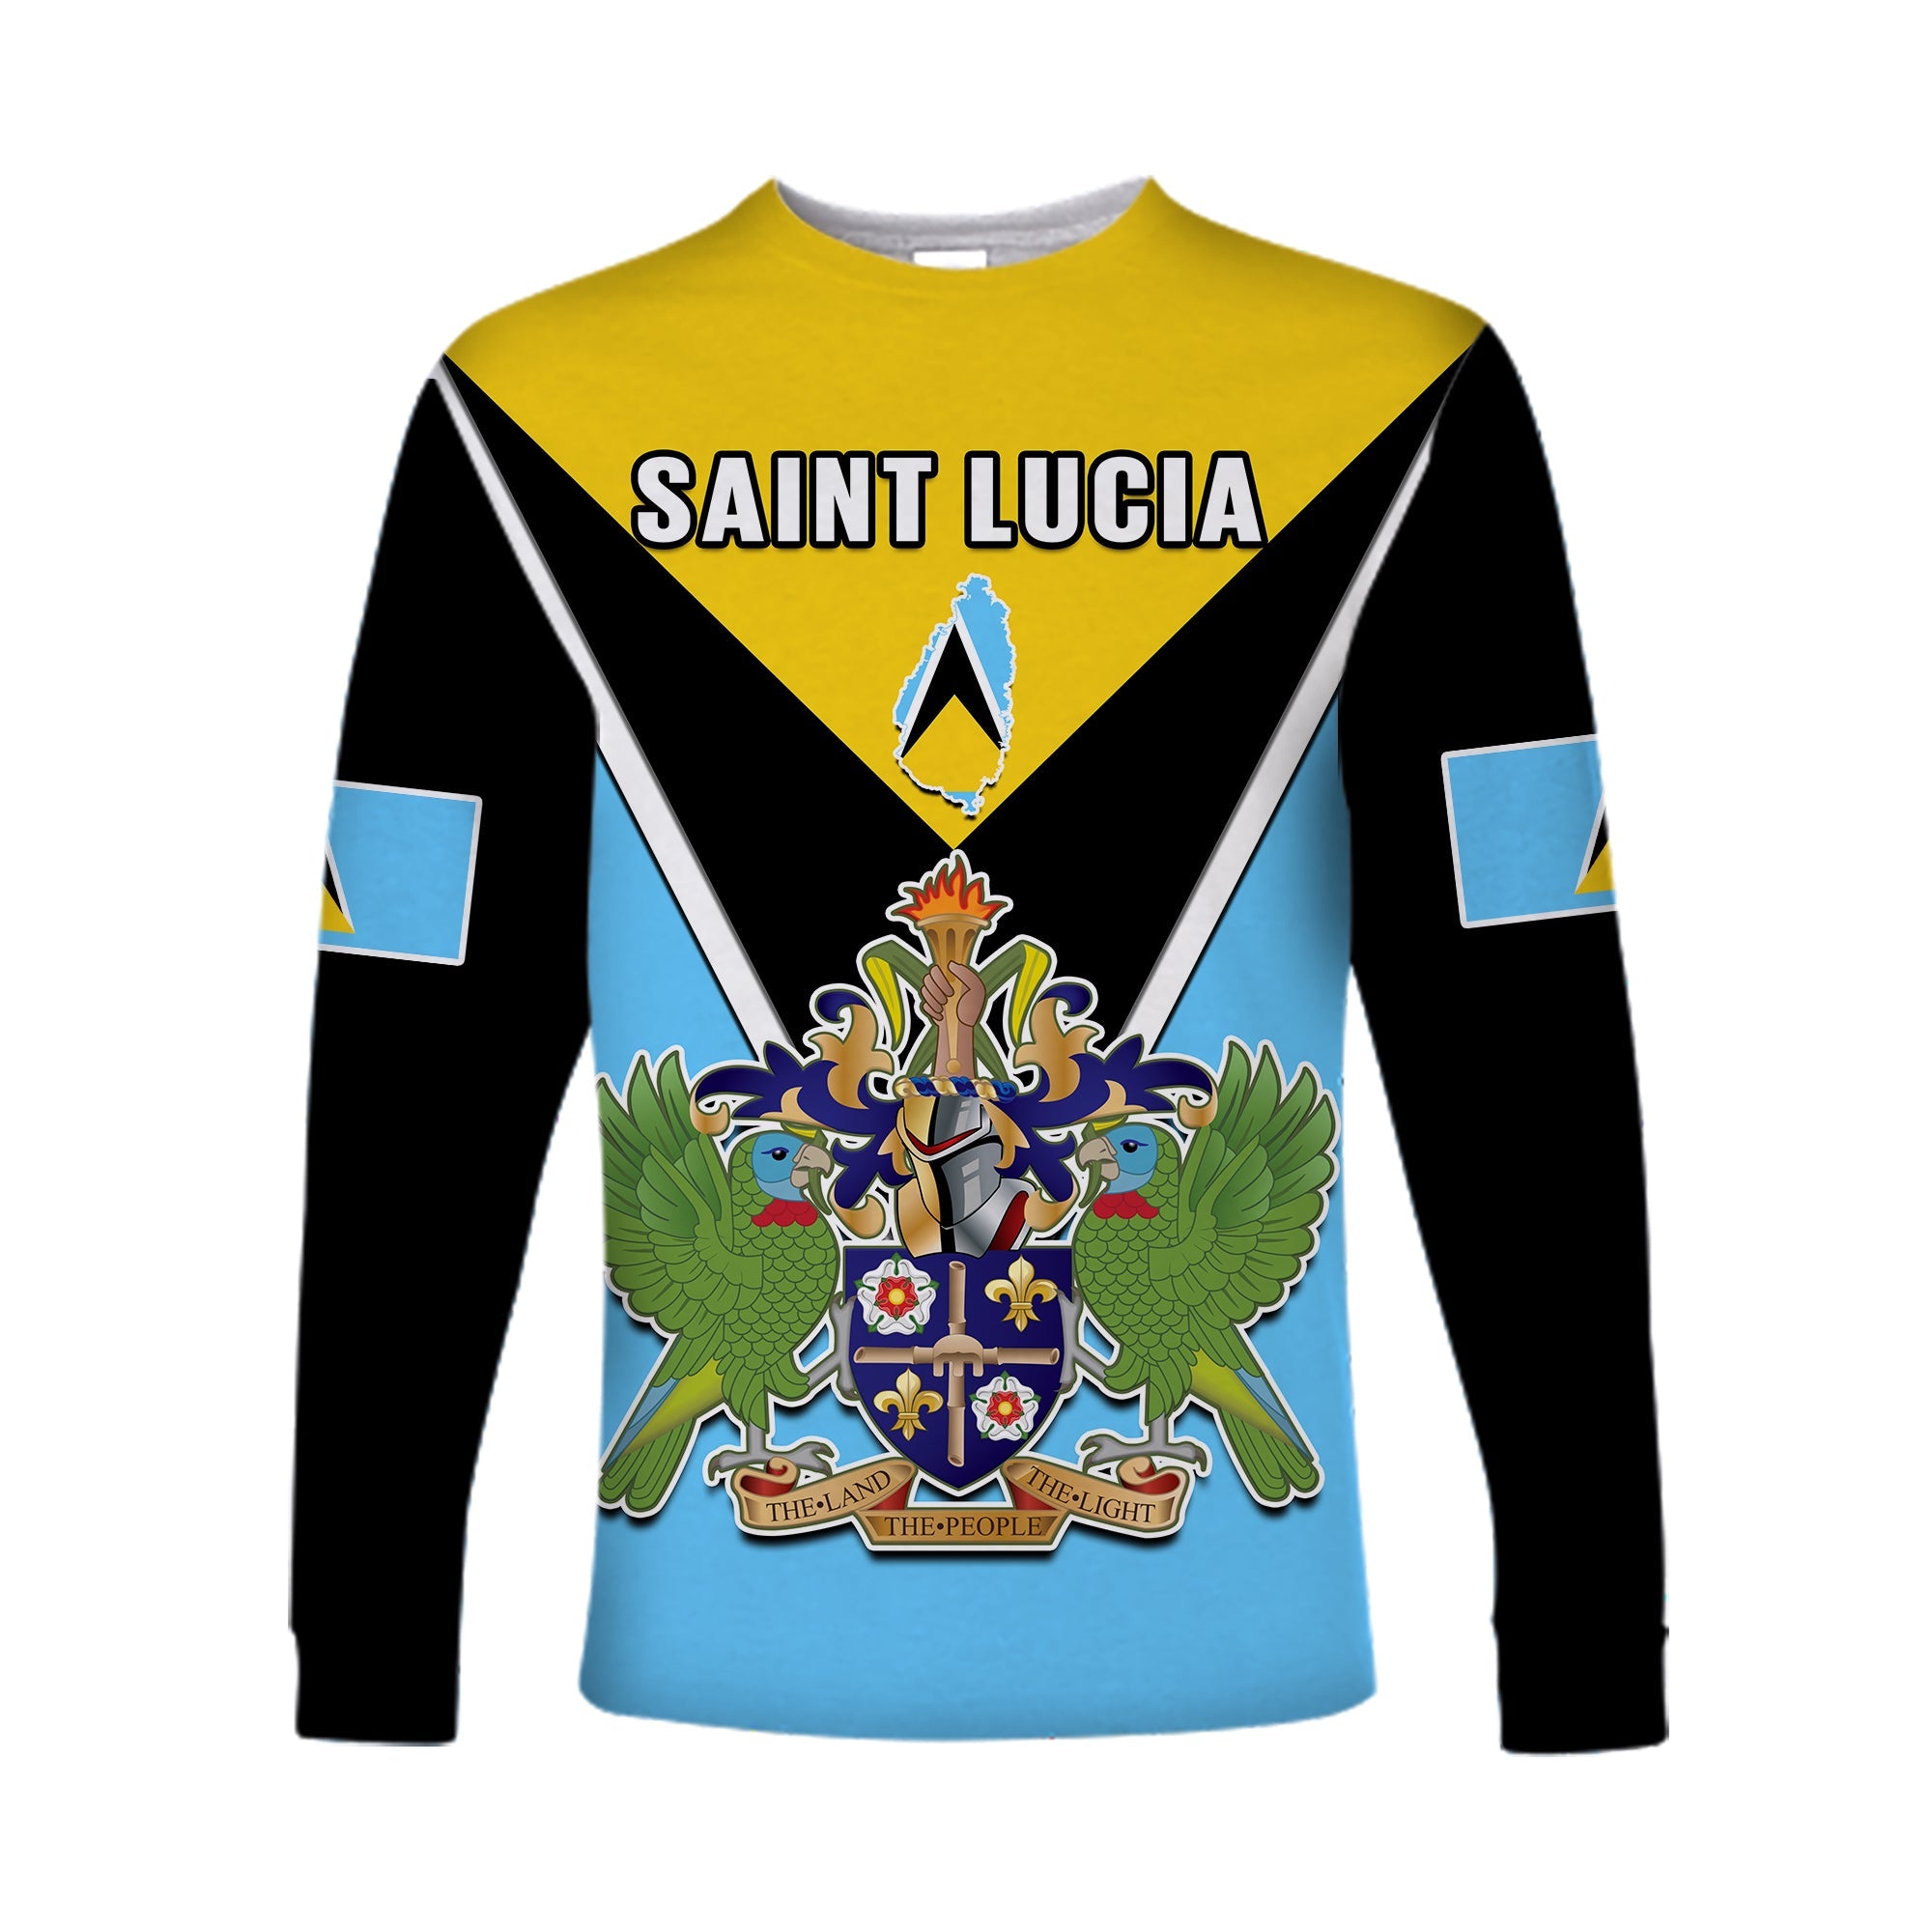 saint-lucia-long-sleeve-shirt-happy-44-years-of-independence